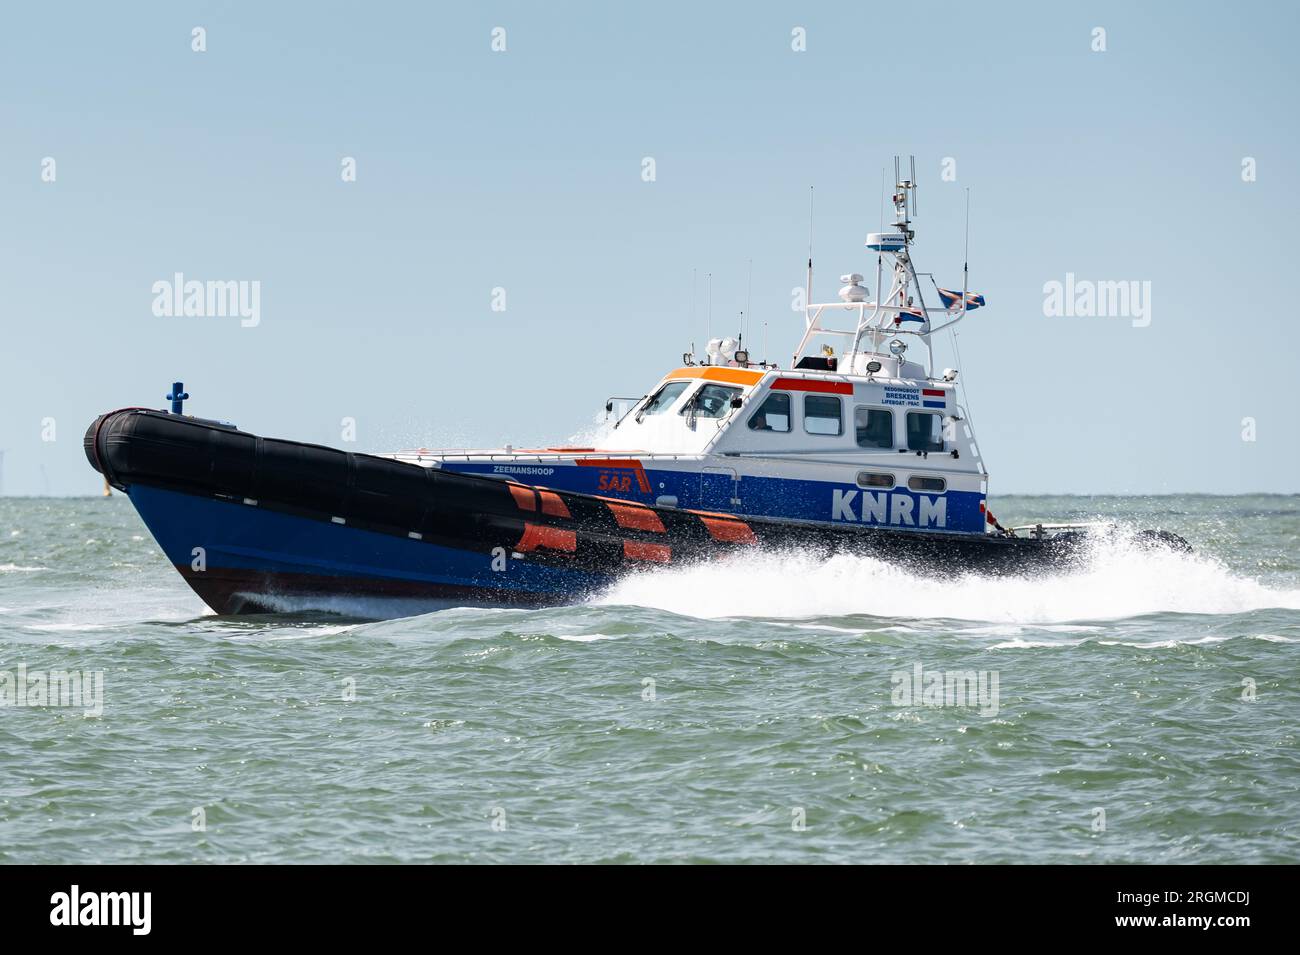 A rescue boat of the Royal Netherlands Sea Rescue Institution (KNRM) at the North Sea near Vlissingen. Stock Photo